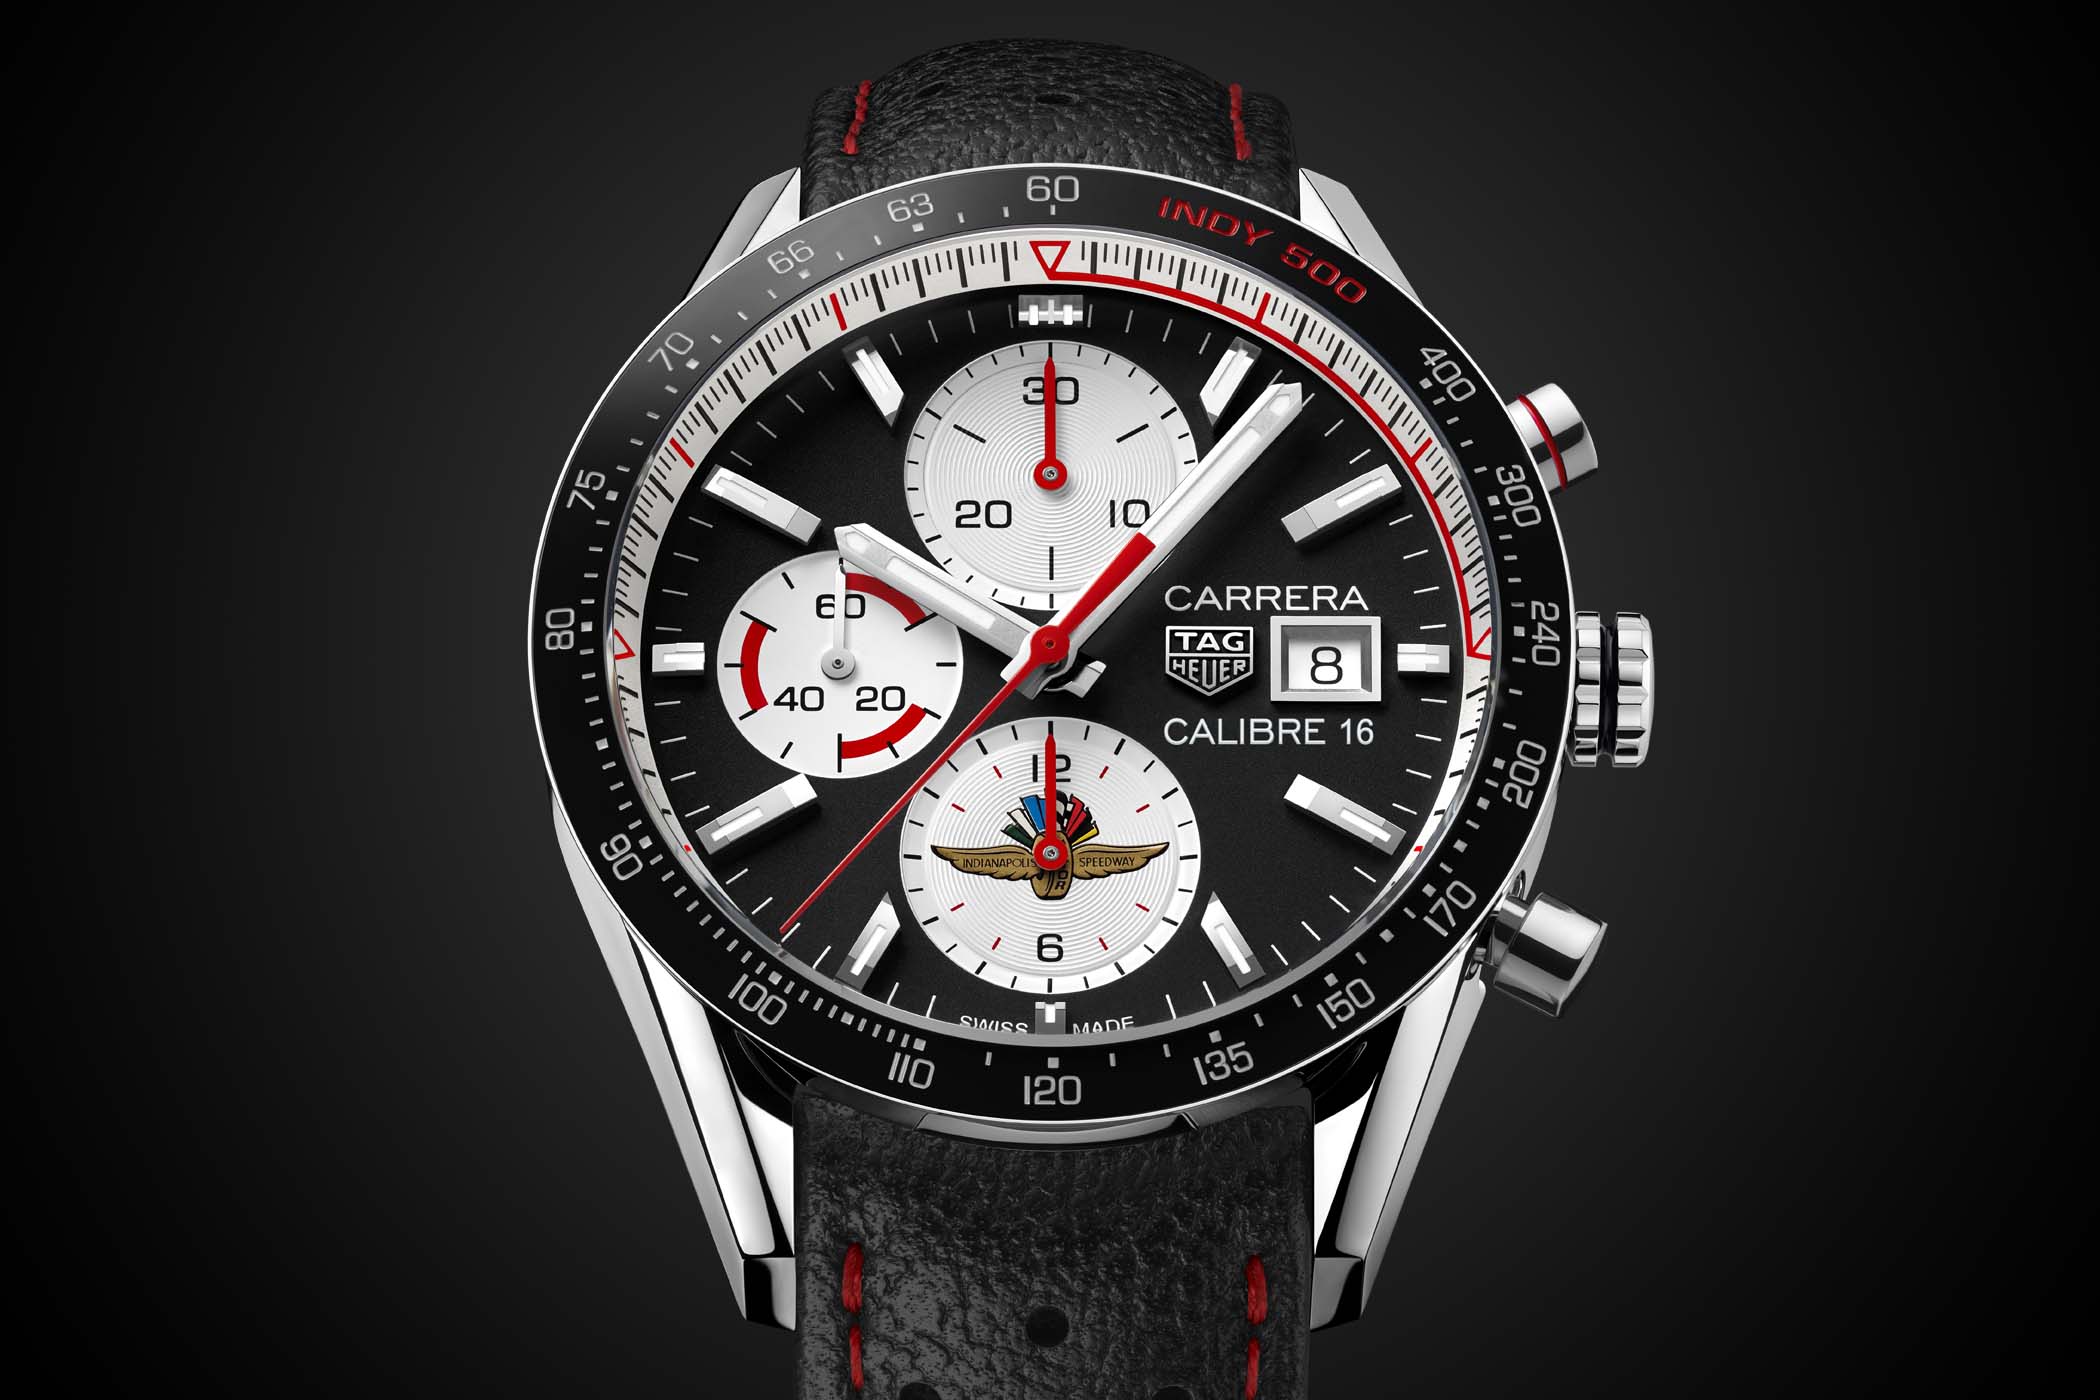 Matar Destino Diverso Introducing - TAG Heuer Carrera Indy 500 Special Edition (Specs & Price)